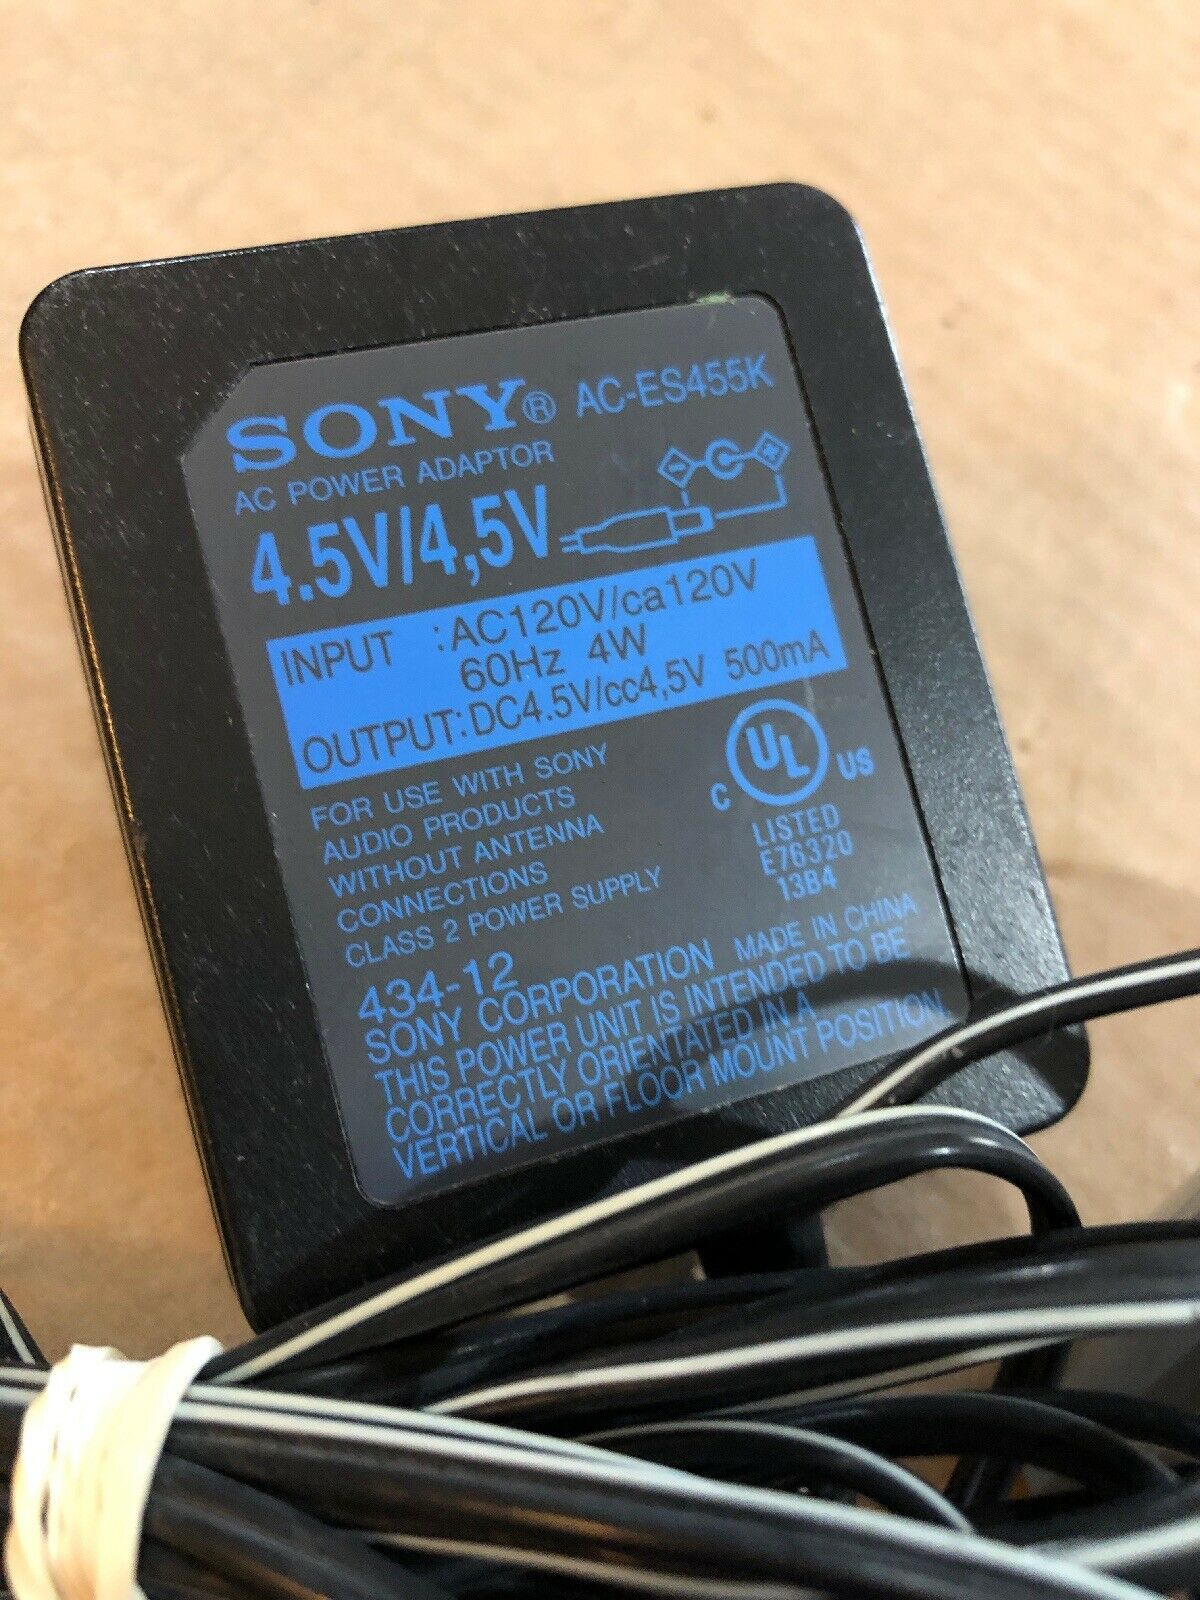 4.5V 500mA AC-ES455K ADAPTER for Sony NWA-UC70D Charging USB Cradle Sony Walkman NW-MS70D - Click Image to Close